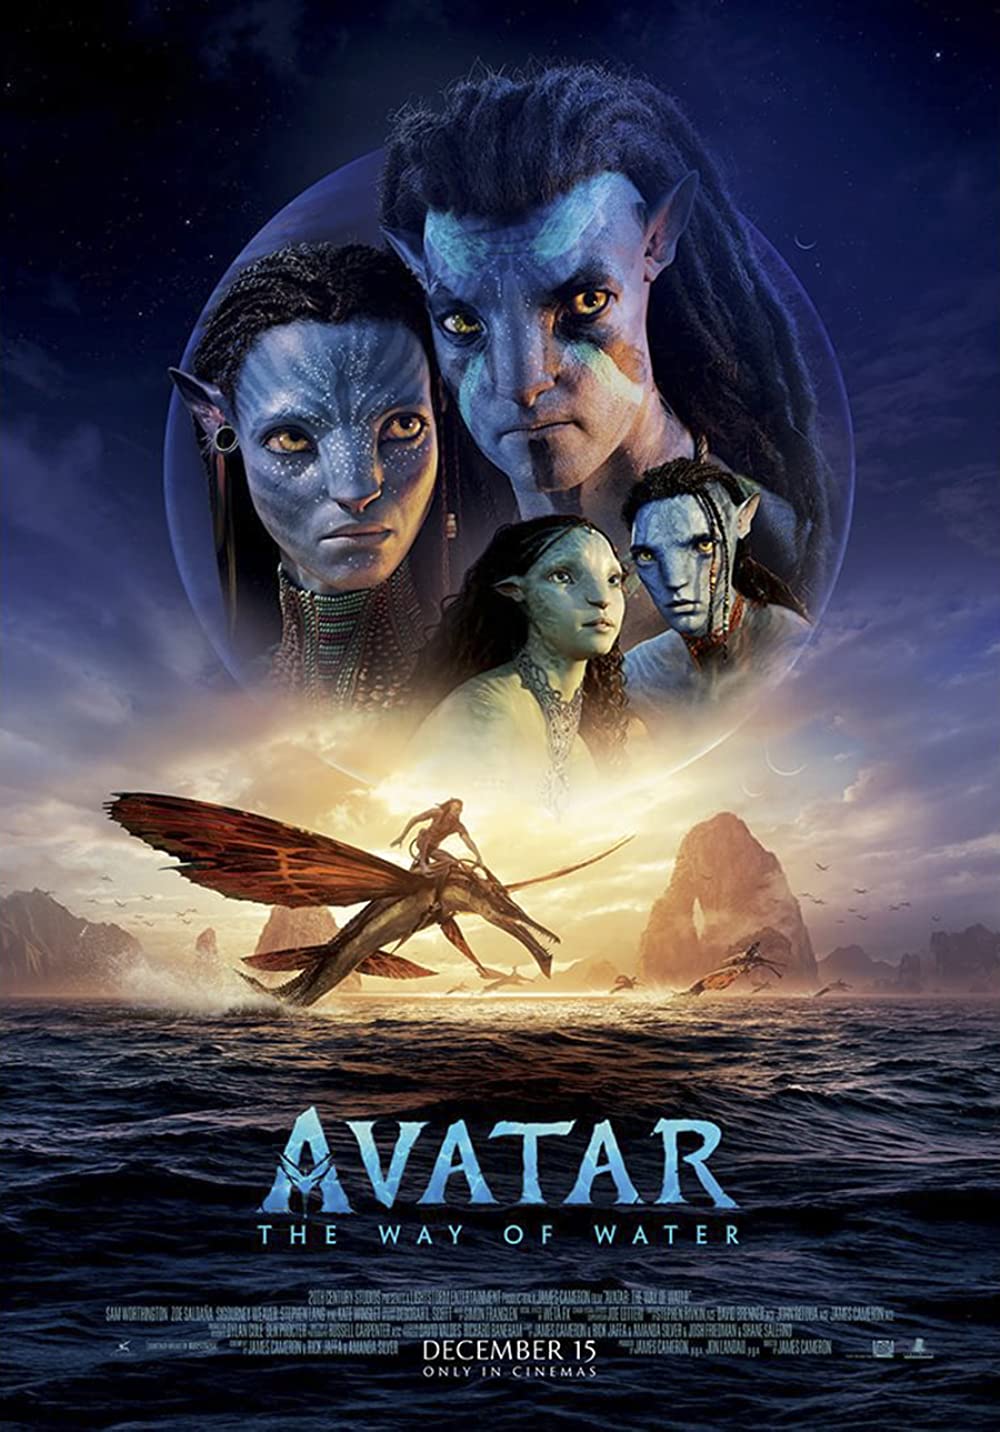 The Cast Of Avatar 2 - Meet The Actors Behind The Characters